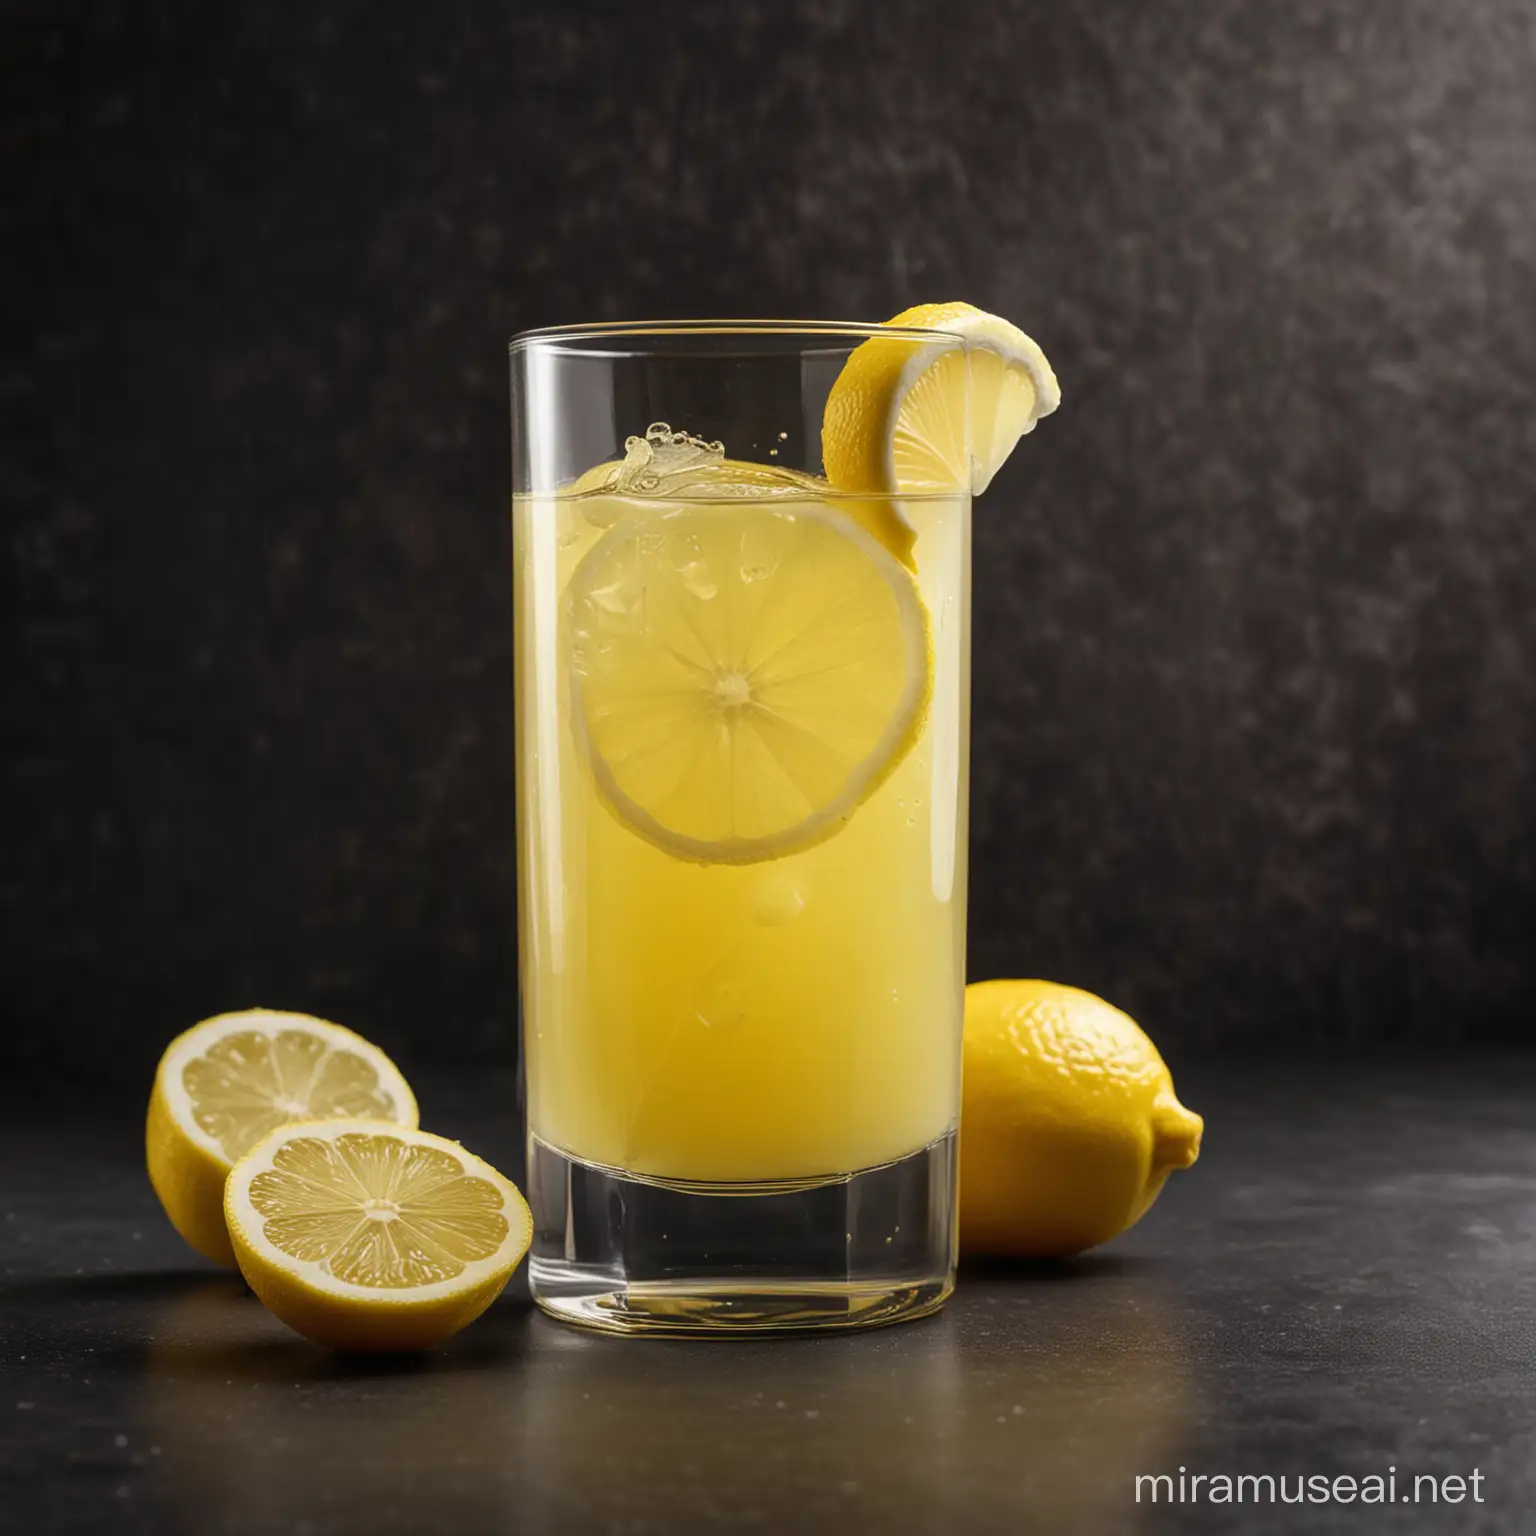 "Create a description for the image with the following data: The image contains a glass filled with lemon juice, next to the glass is a lemon that was made from lemons. There is a dark background in the background